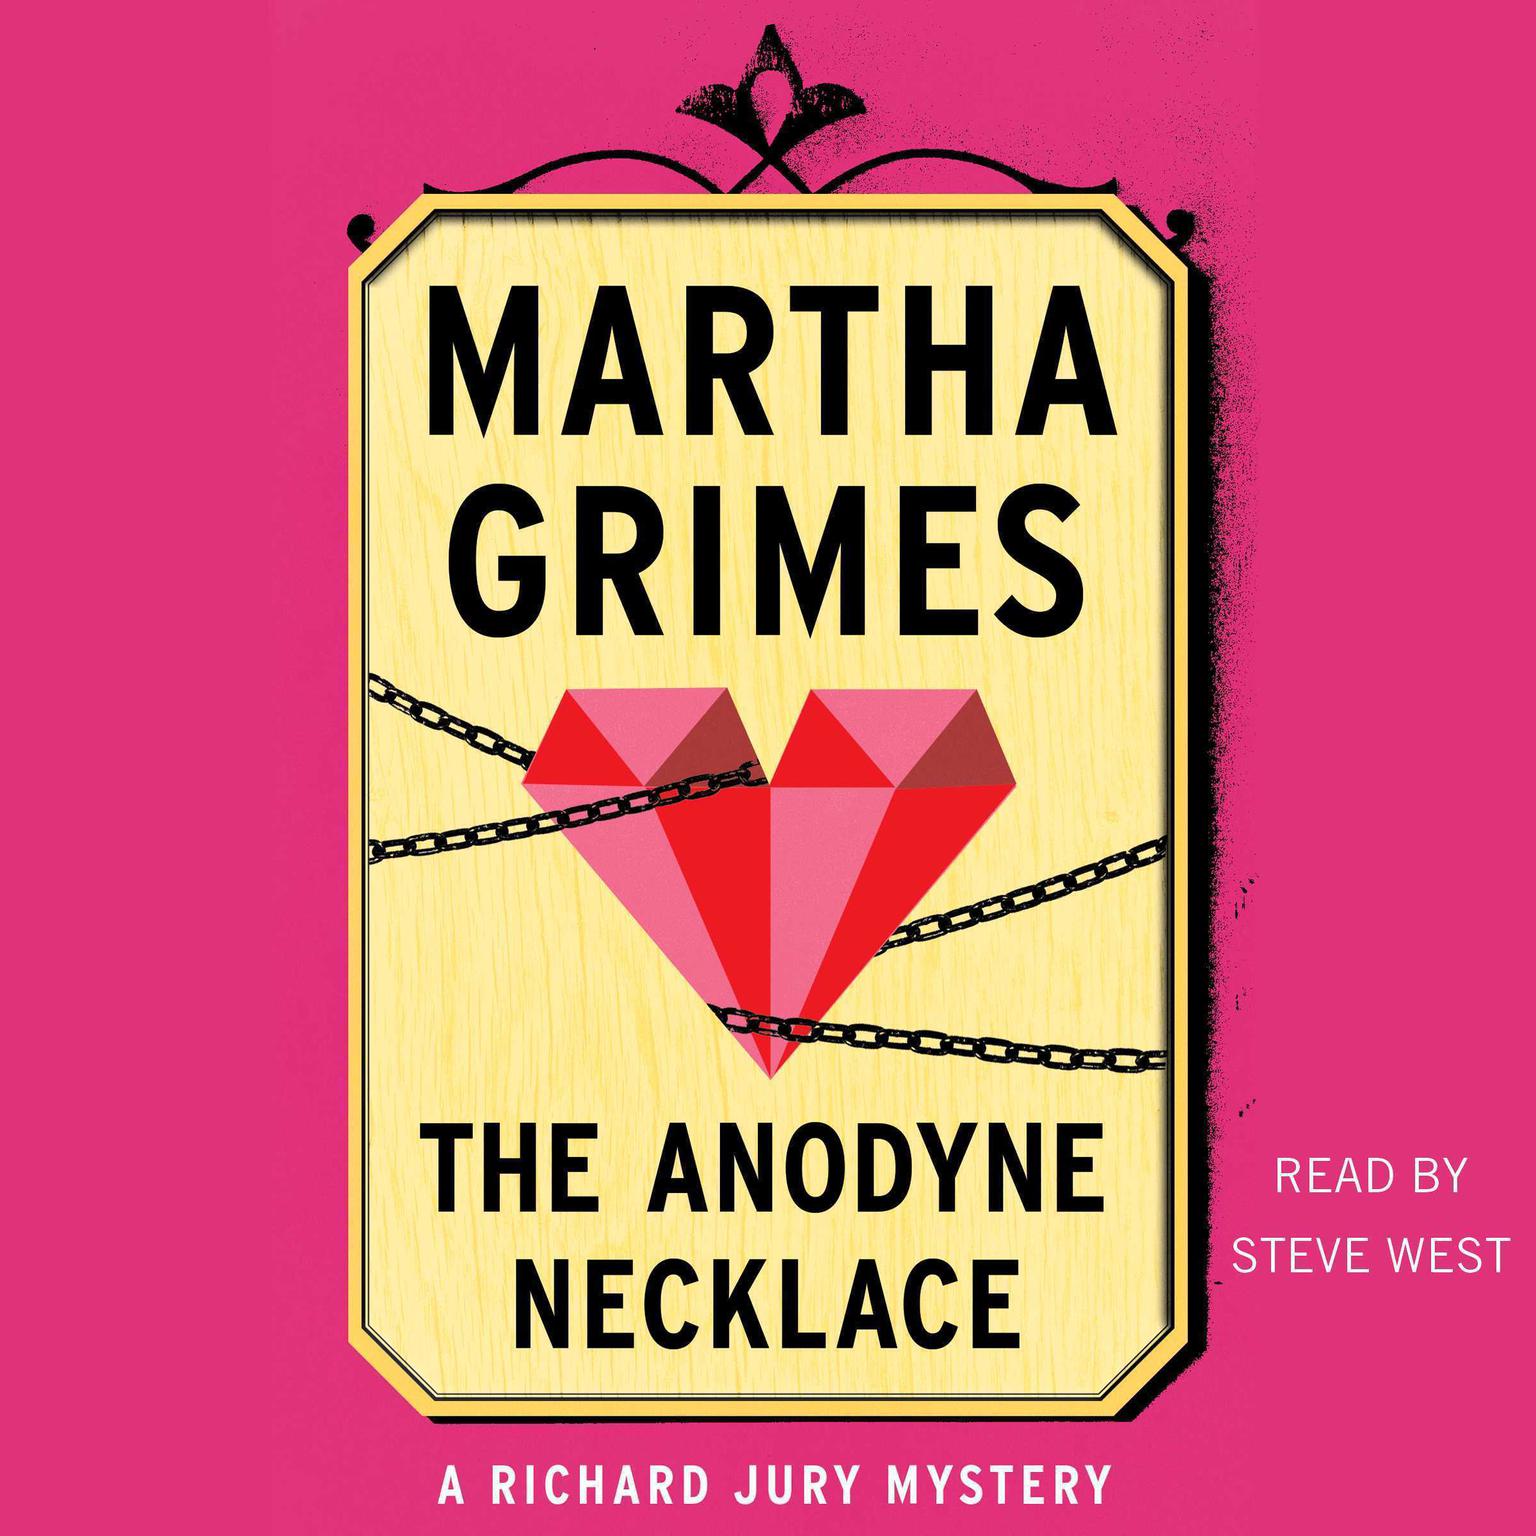 The Anodyne Necklace Audiobook, by Martha Grimes